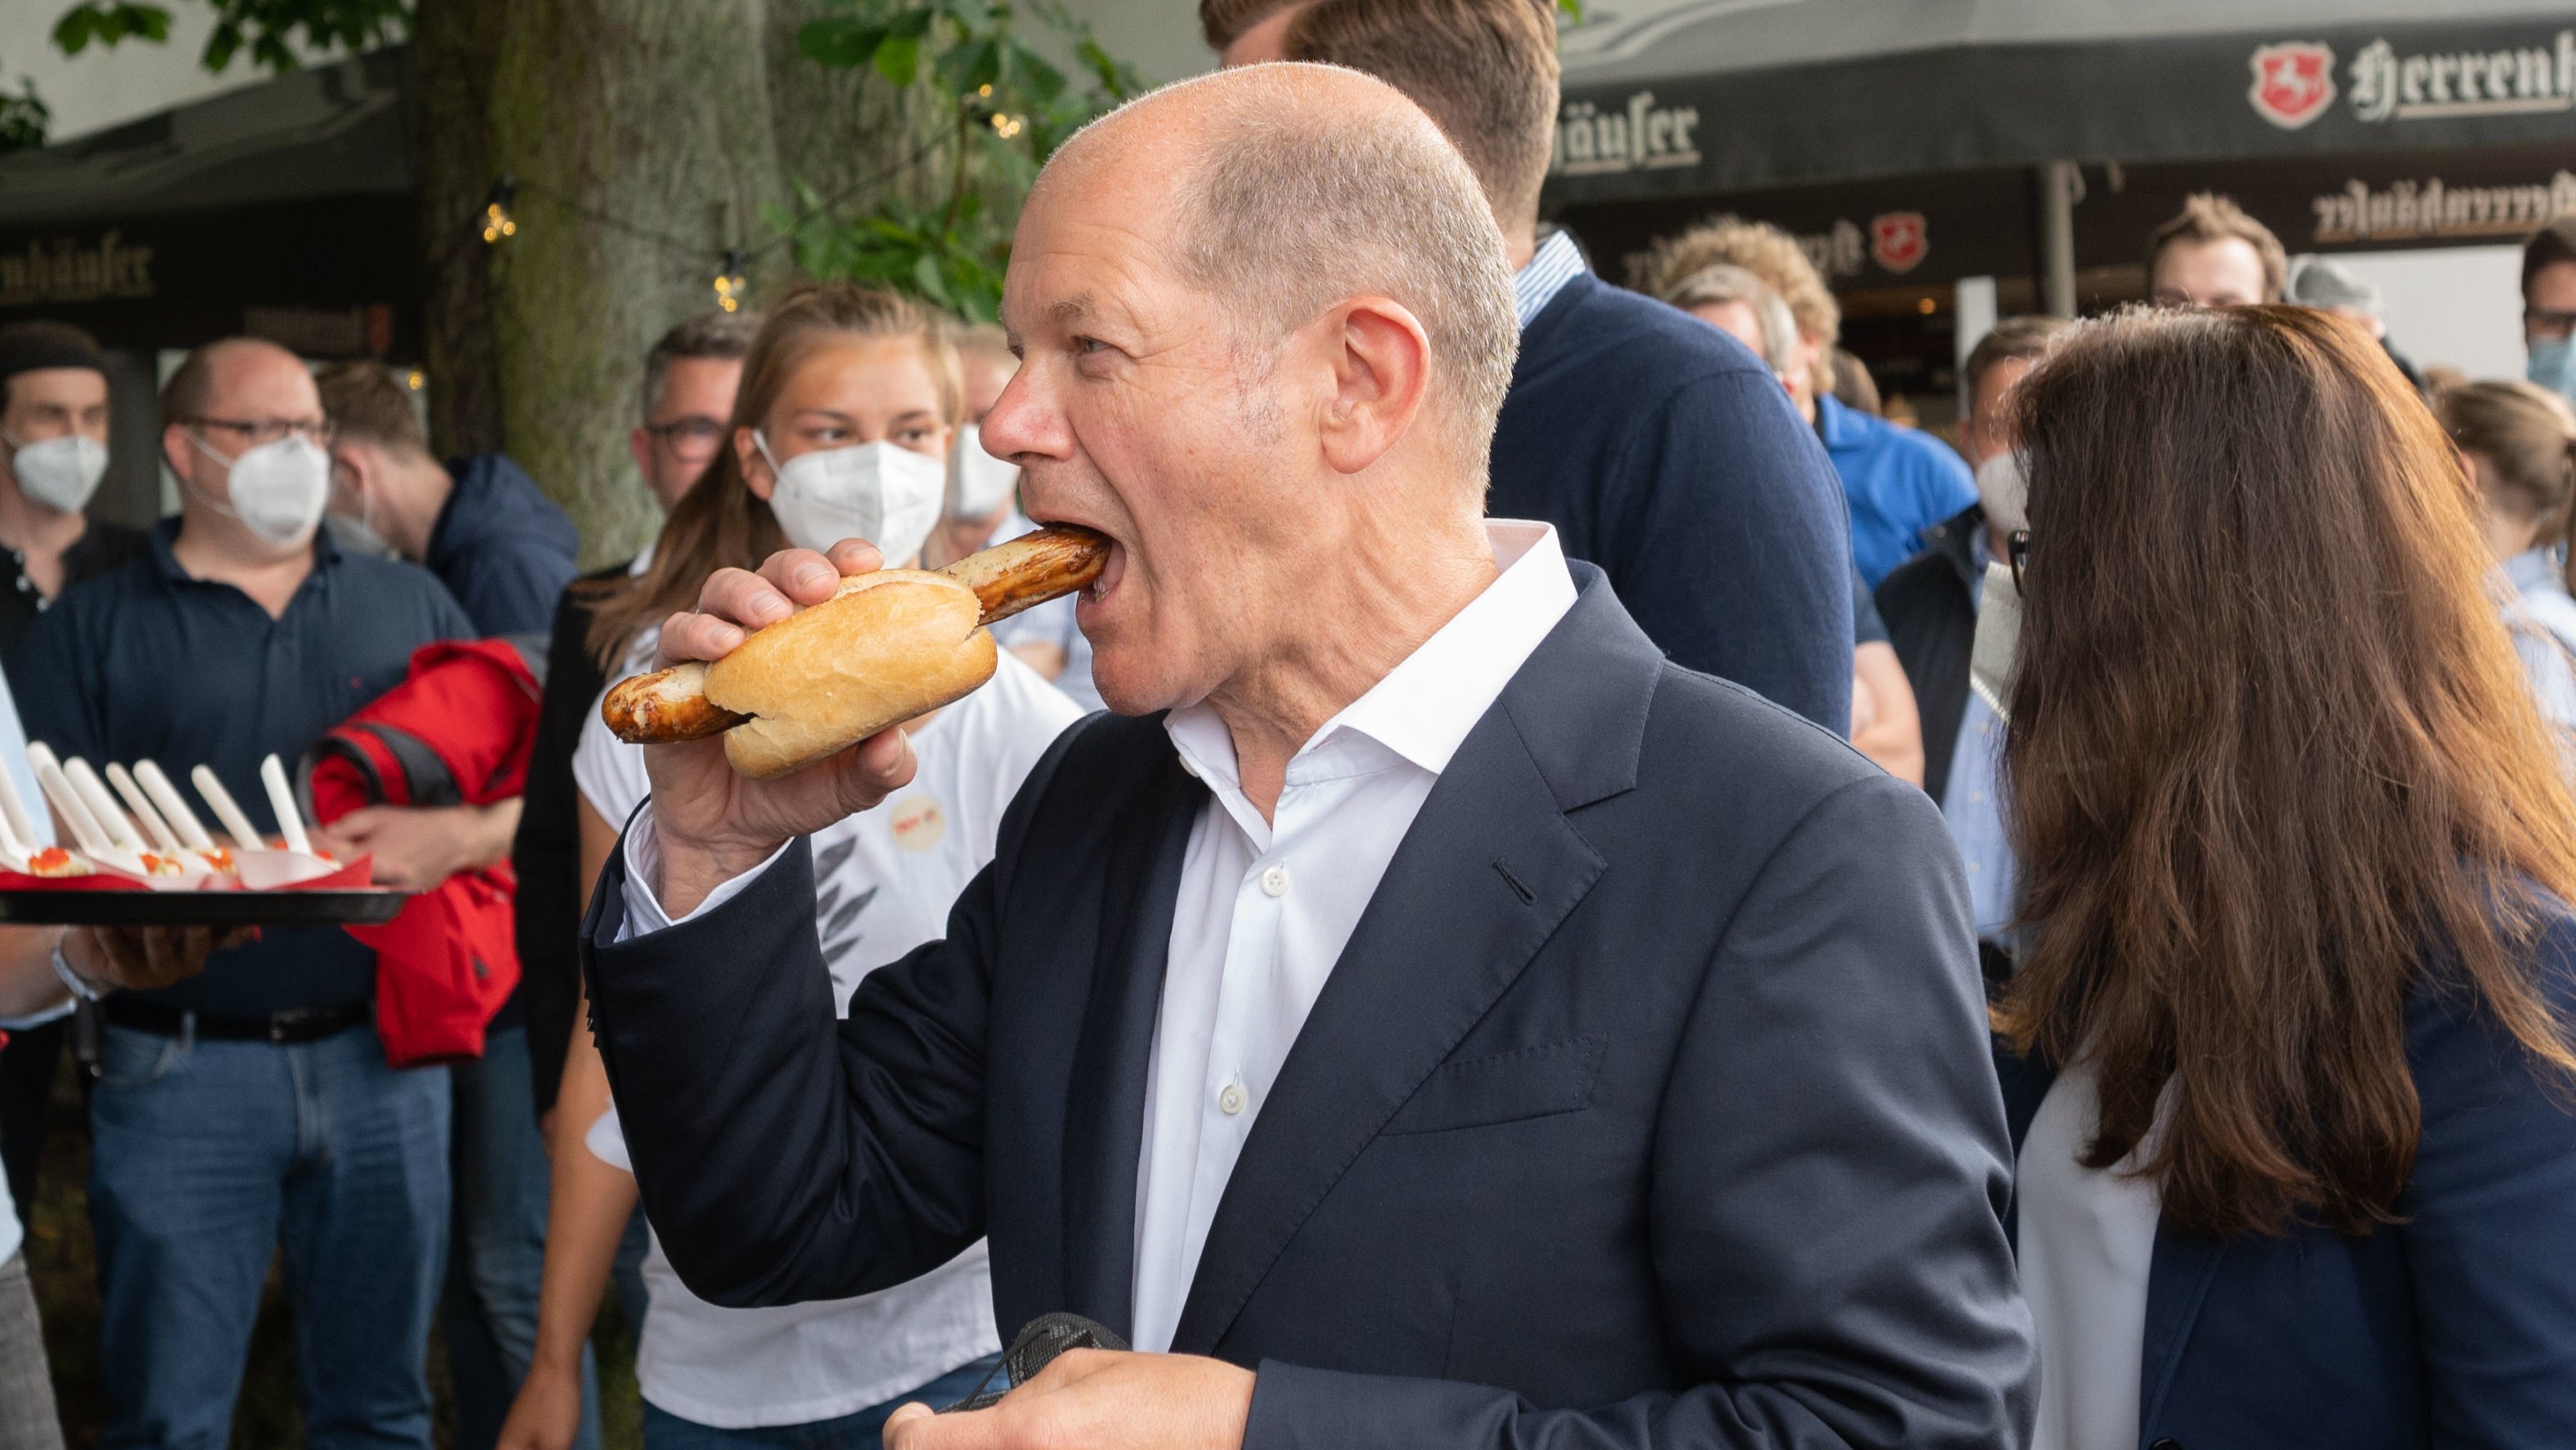 Election campaign tour Olaf Scholz (SPD) in the Hannover Region